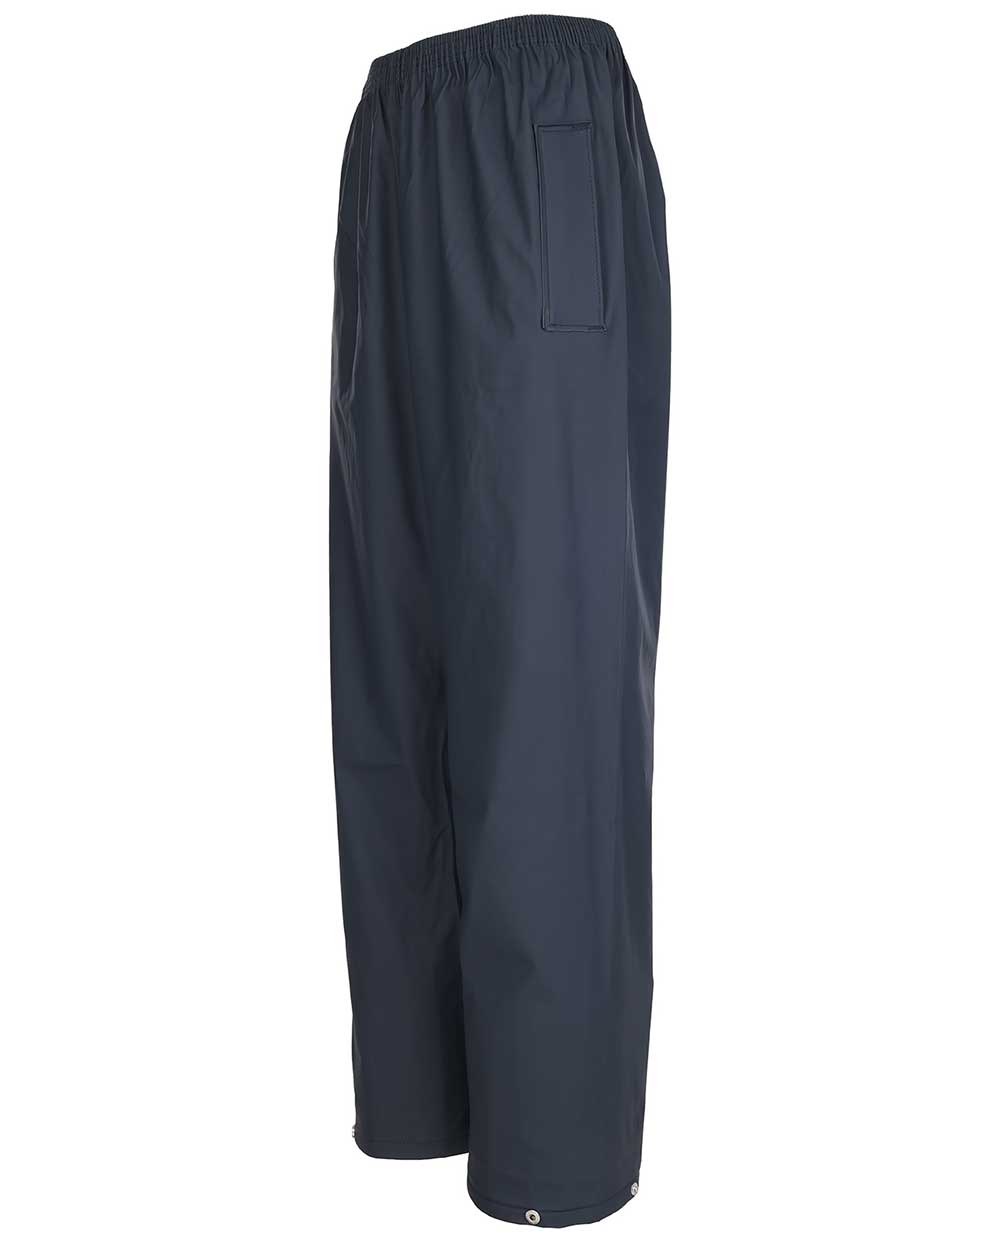 Navy coloured Fort Fortex Flex Waterproof Trousers on white background 